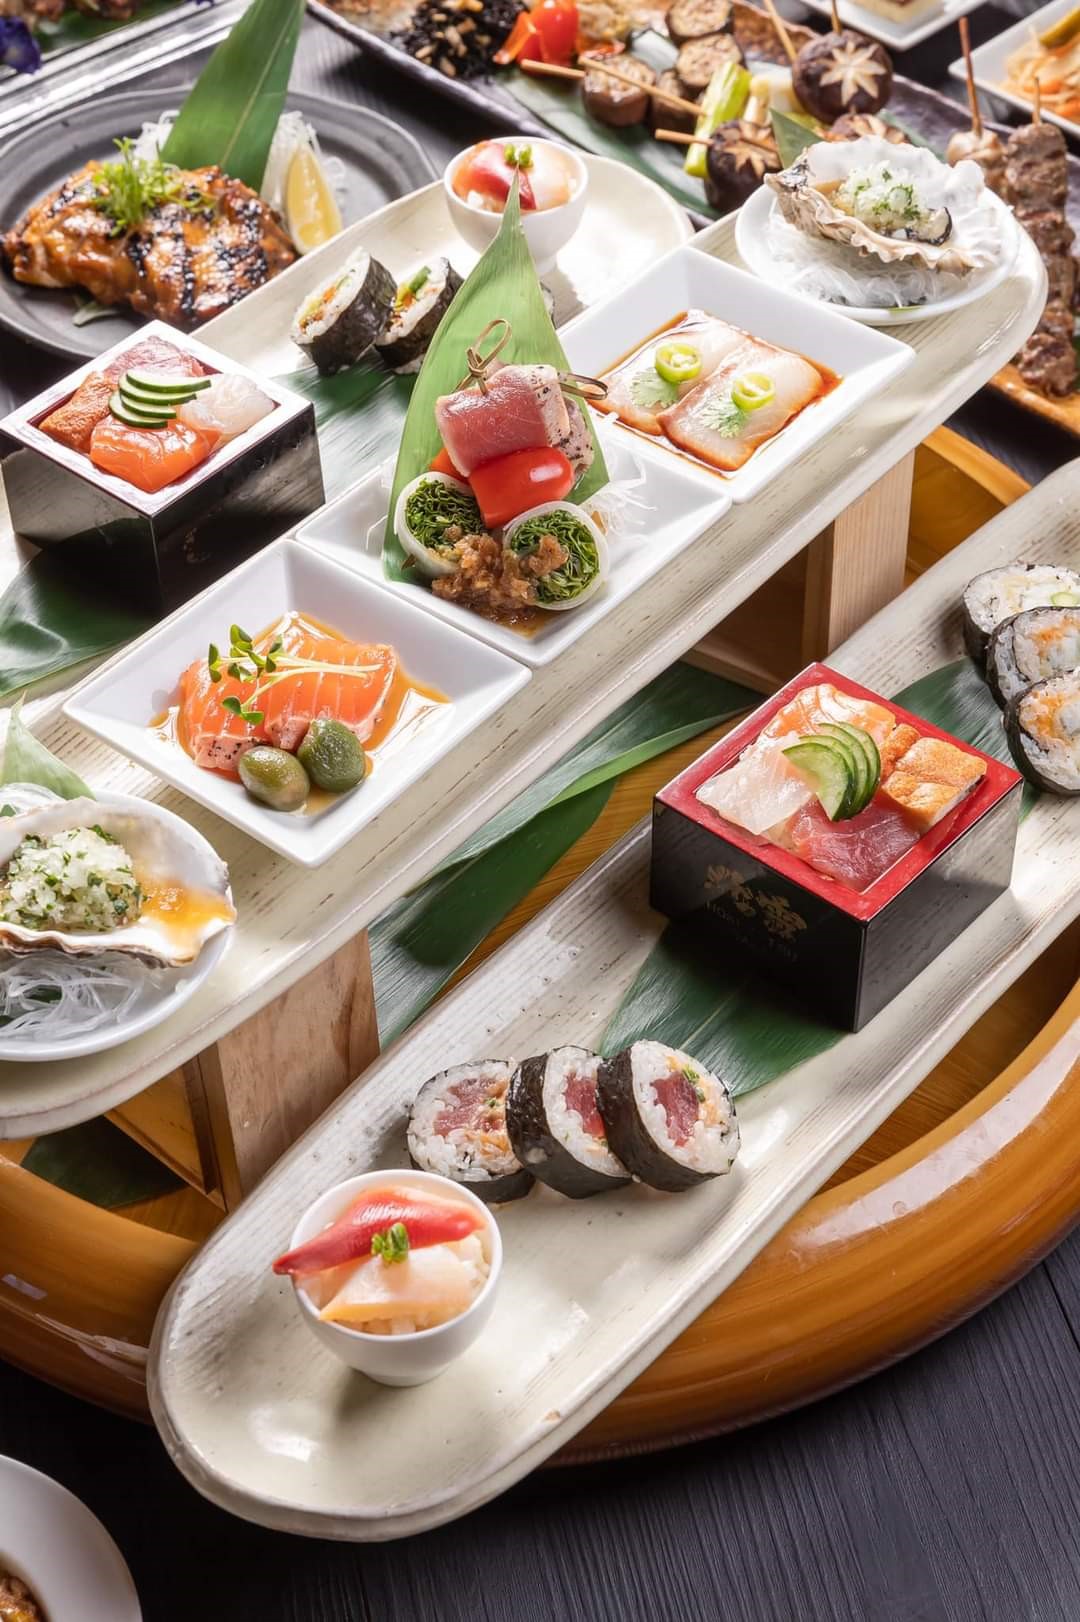   SUNDAY BRUNCH IS BACK!   Starting on September 11, 2022, Sunday new opening hour of our Sunday Brunch will start at 11:30am and with same closure at 3:00pm.  Please enjoy our Nobu Style Buffet exclusive for Brunch service.   